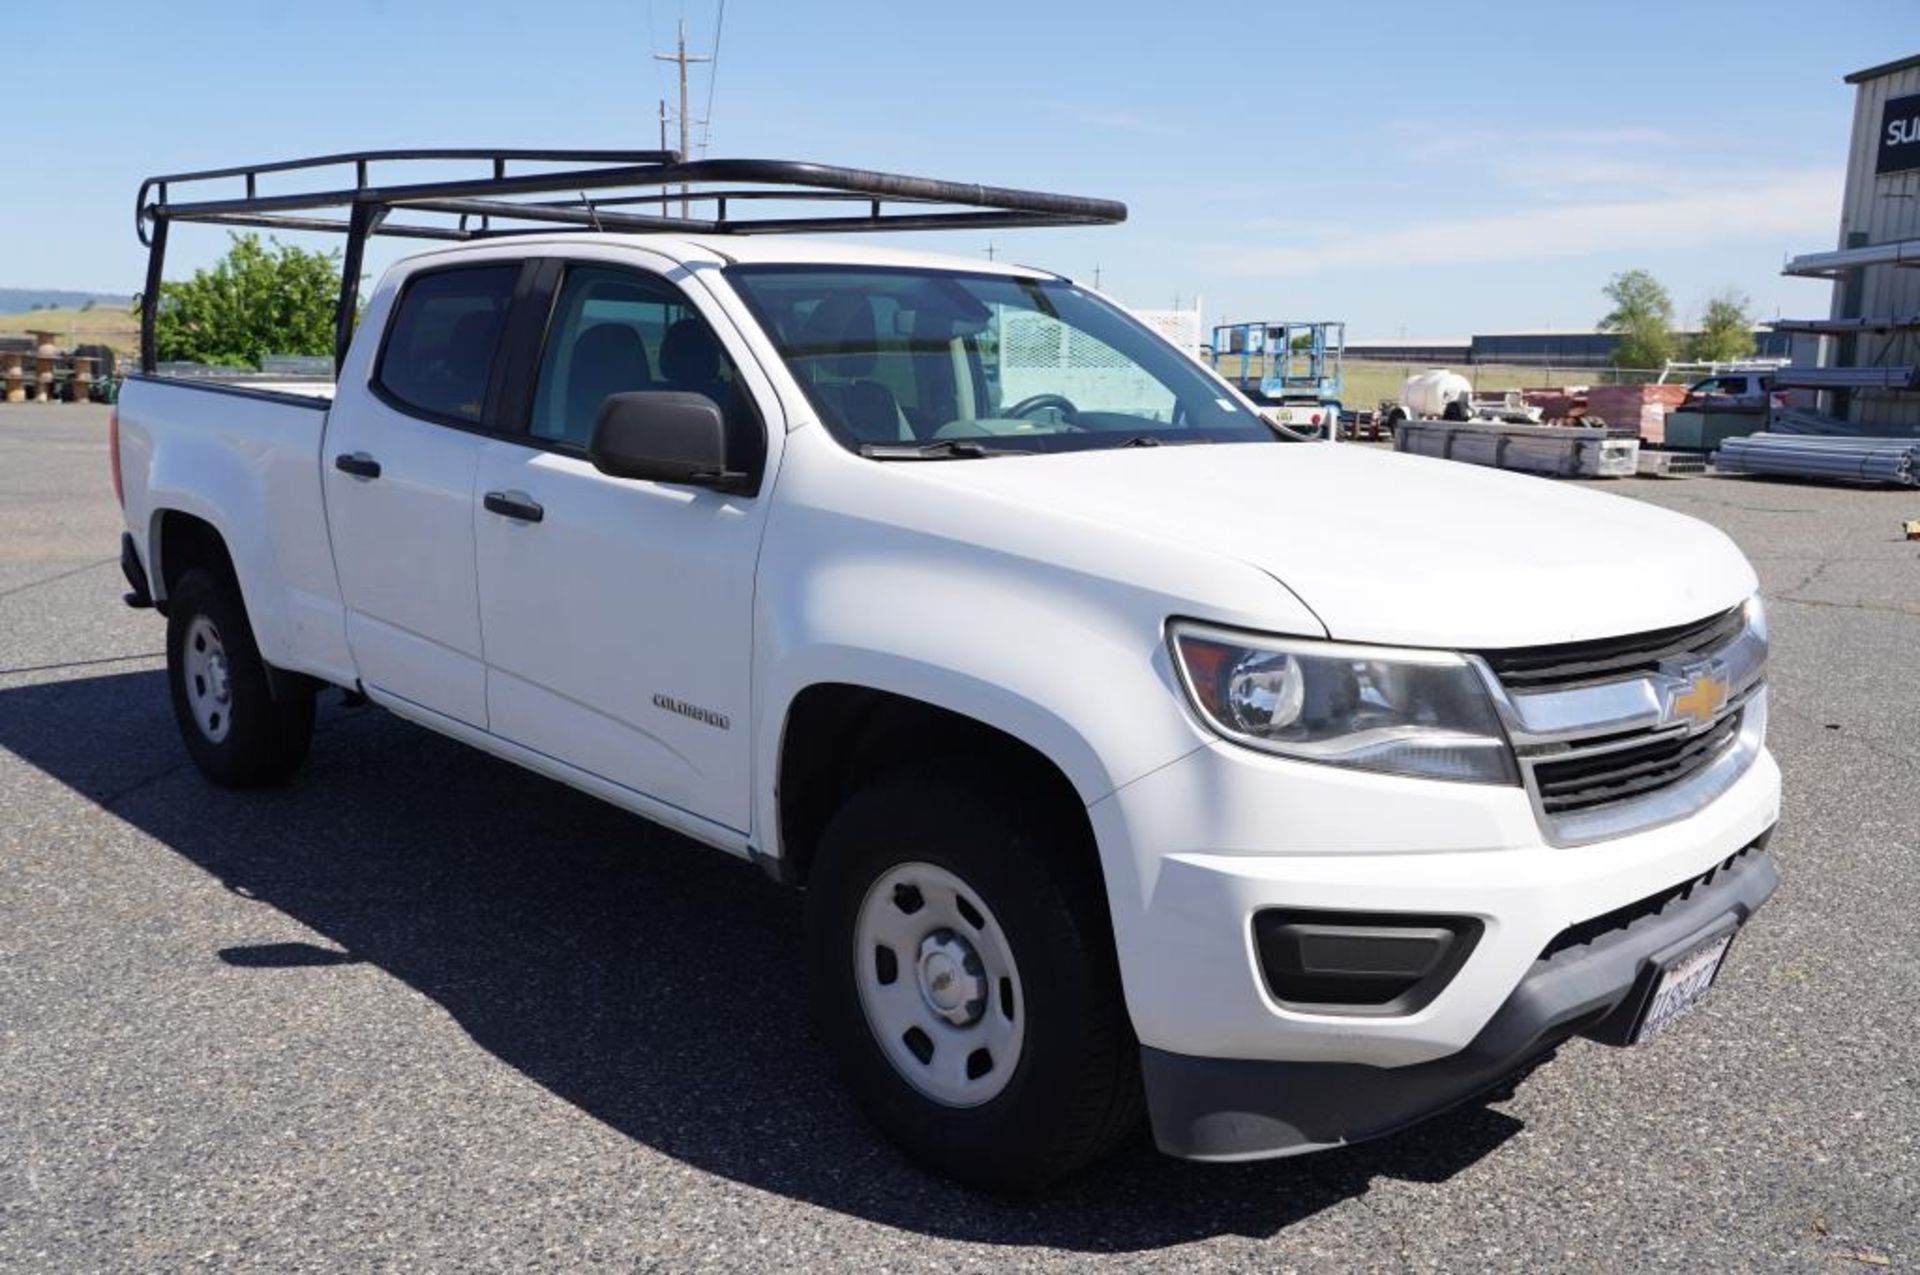 2016 Chevy Colorado Pick Up Truck - Image 3 of 13